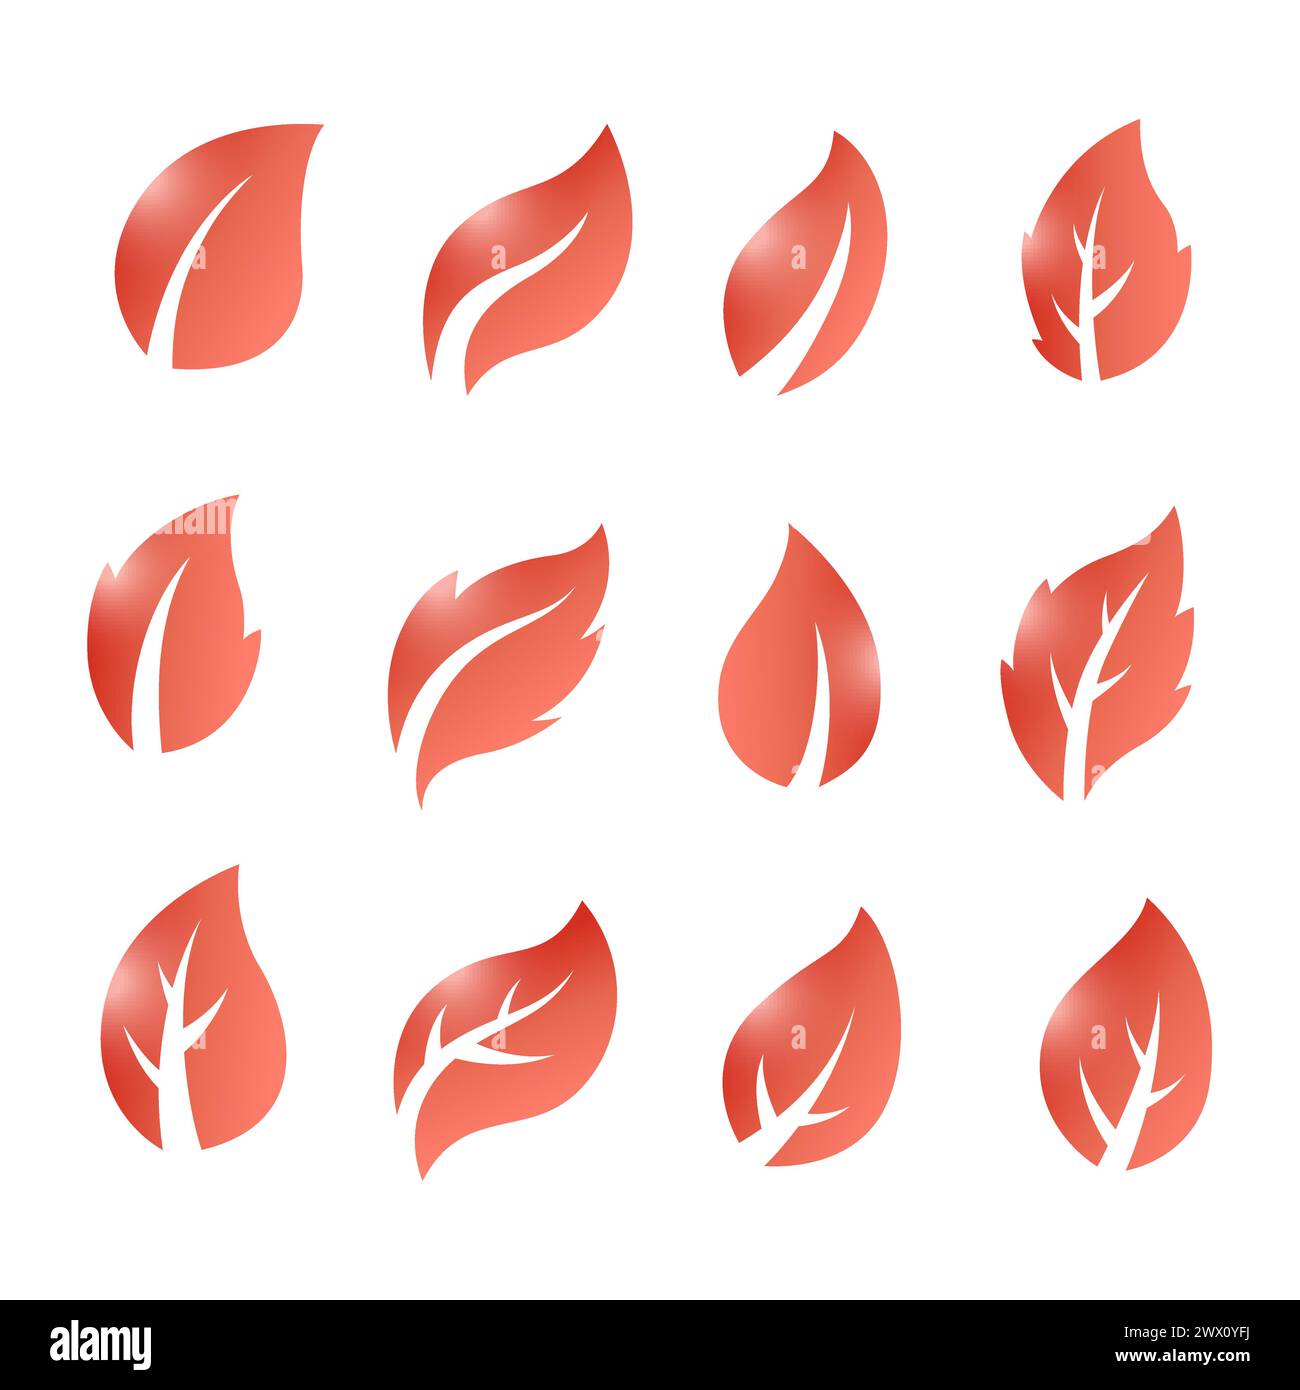 Artistic Collection of Red Leaves Set, Vector Illustration Stock Vector